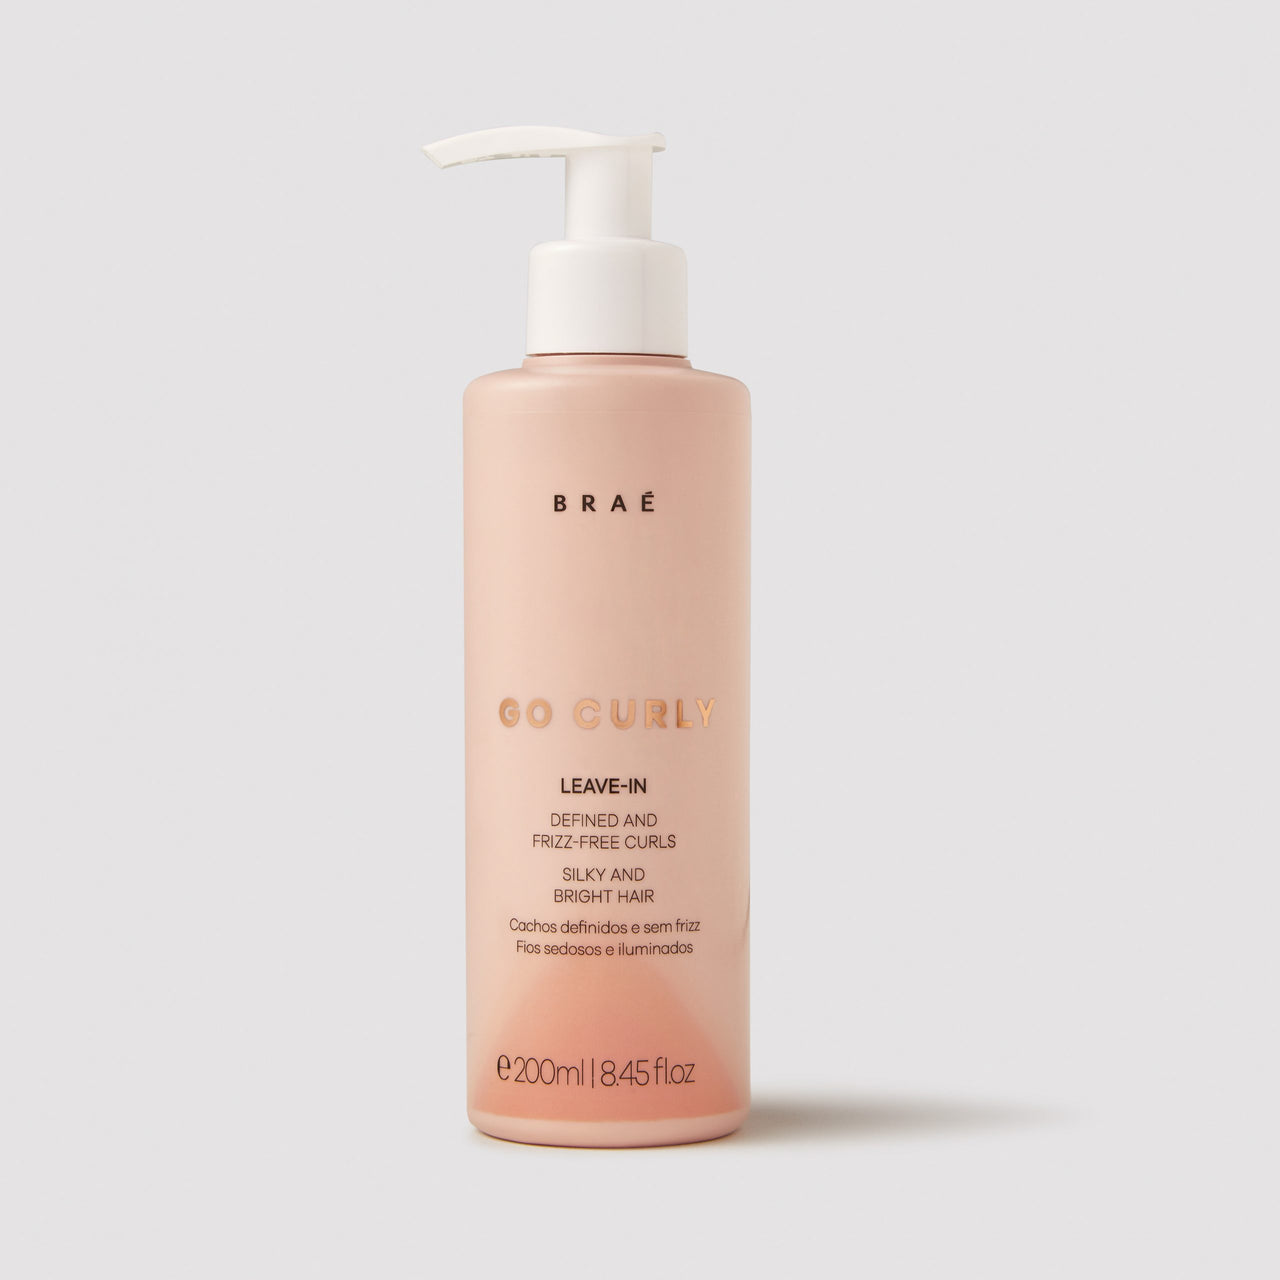 BRAE - Go Curly Leave-in 200ml